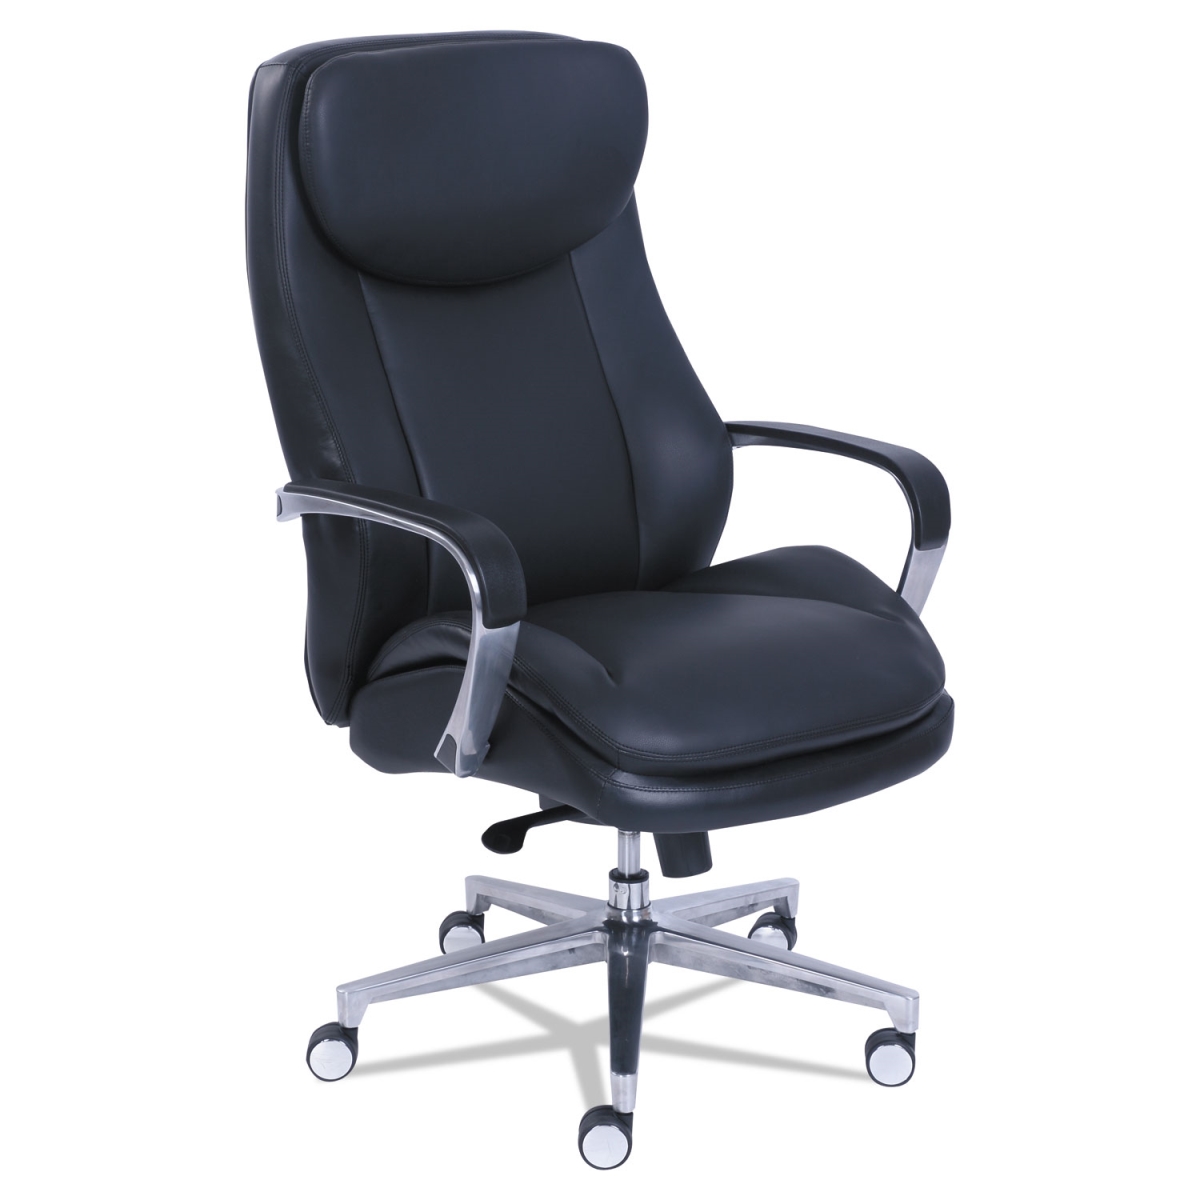 Lzb48958 Commercial 2000 High-back Executive Chair, Black